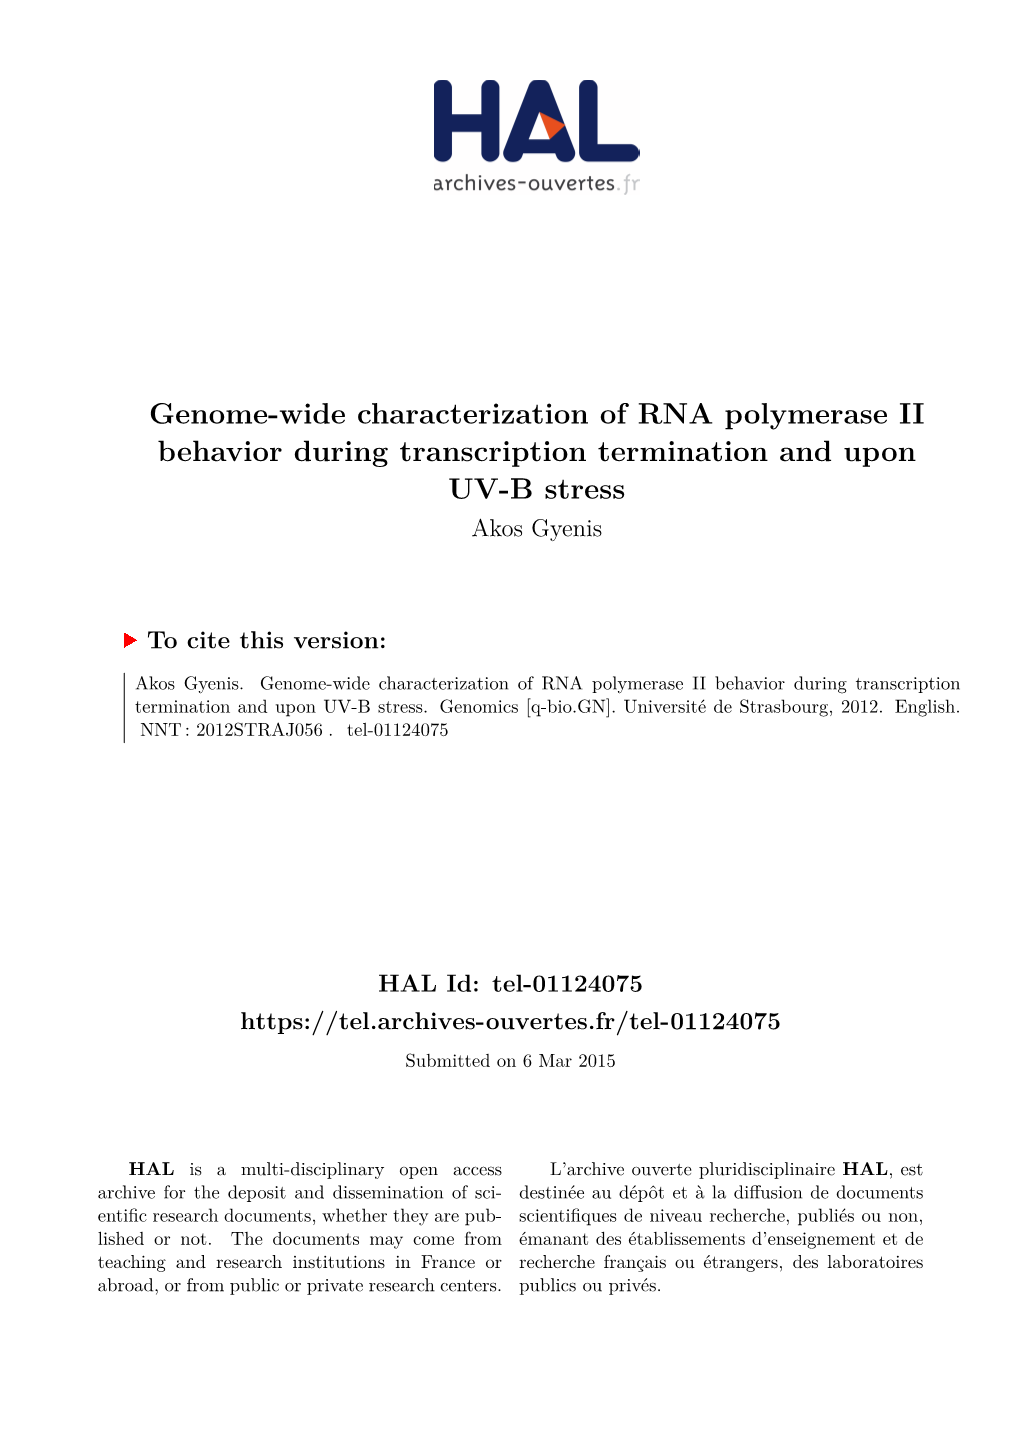 Genome-Wide Characterization of RNA Polymerase II Behavior During Transcription Termination and Upon UV-B Stress Akos Gyenis